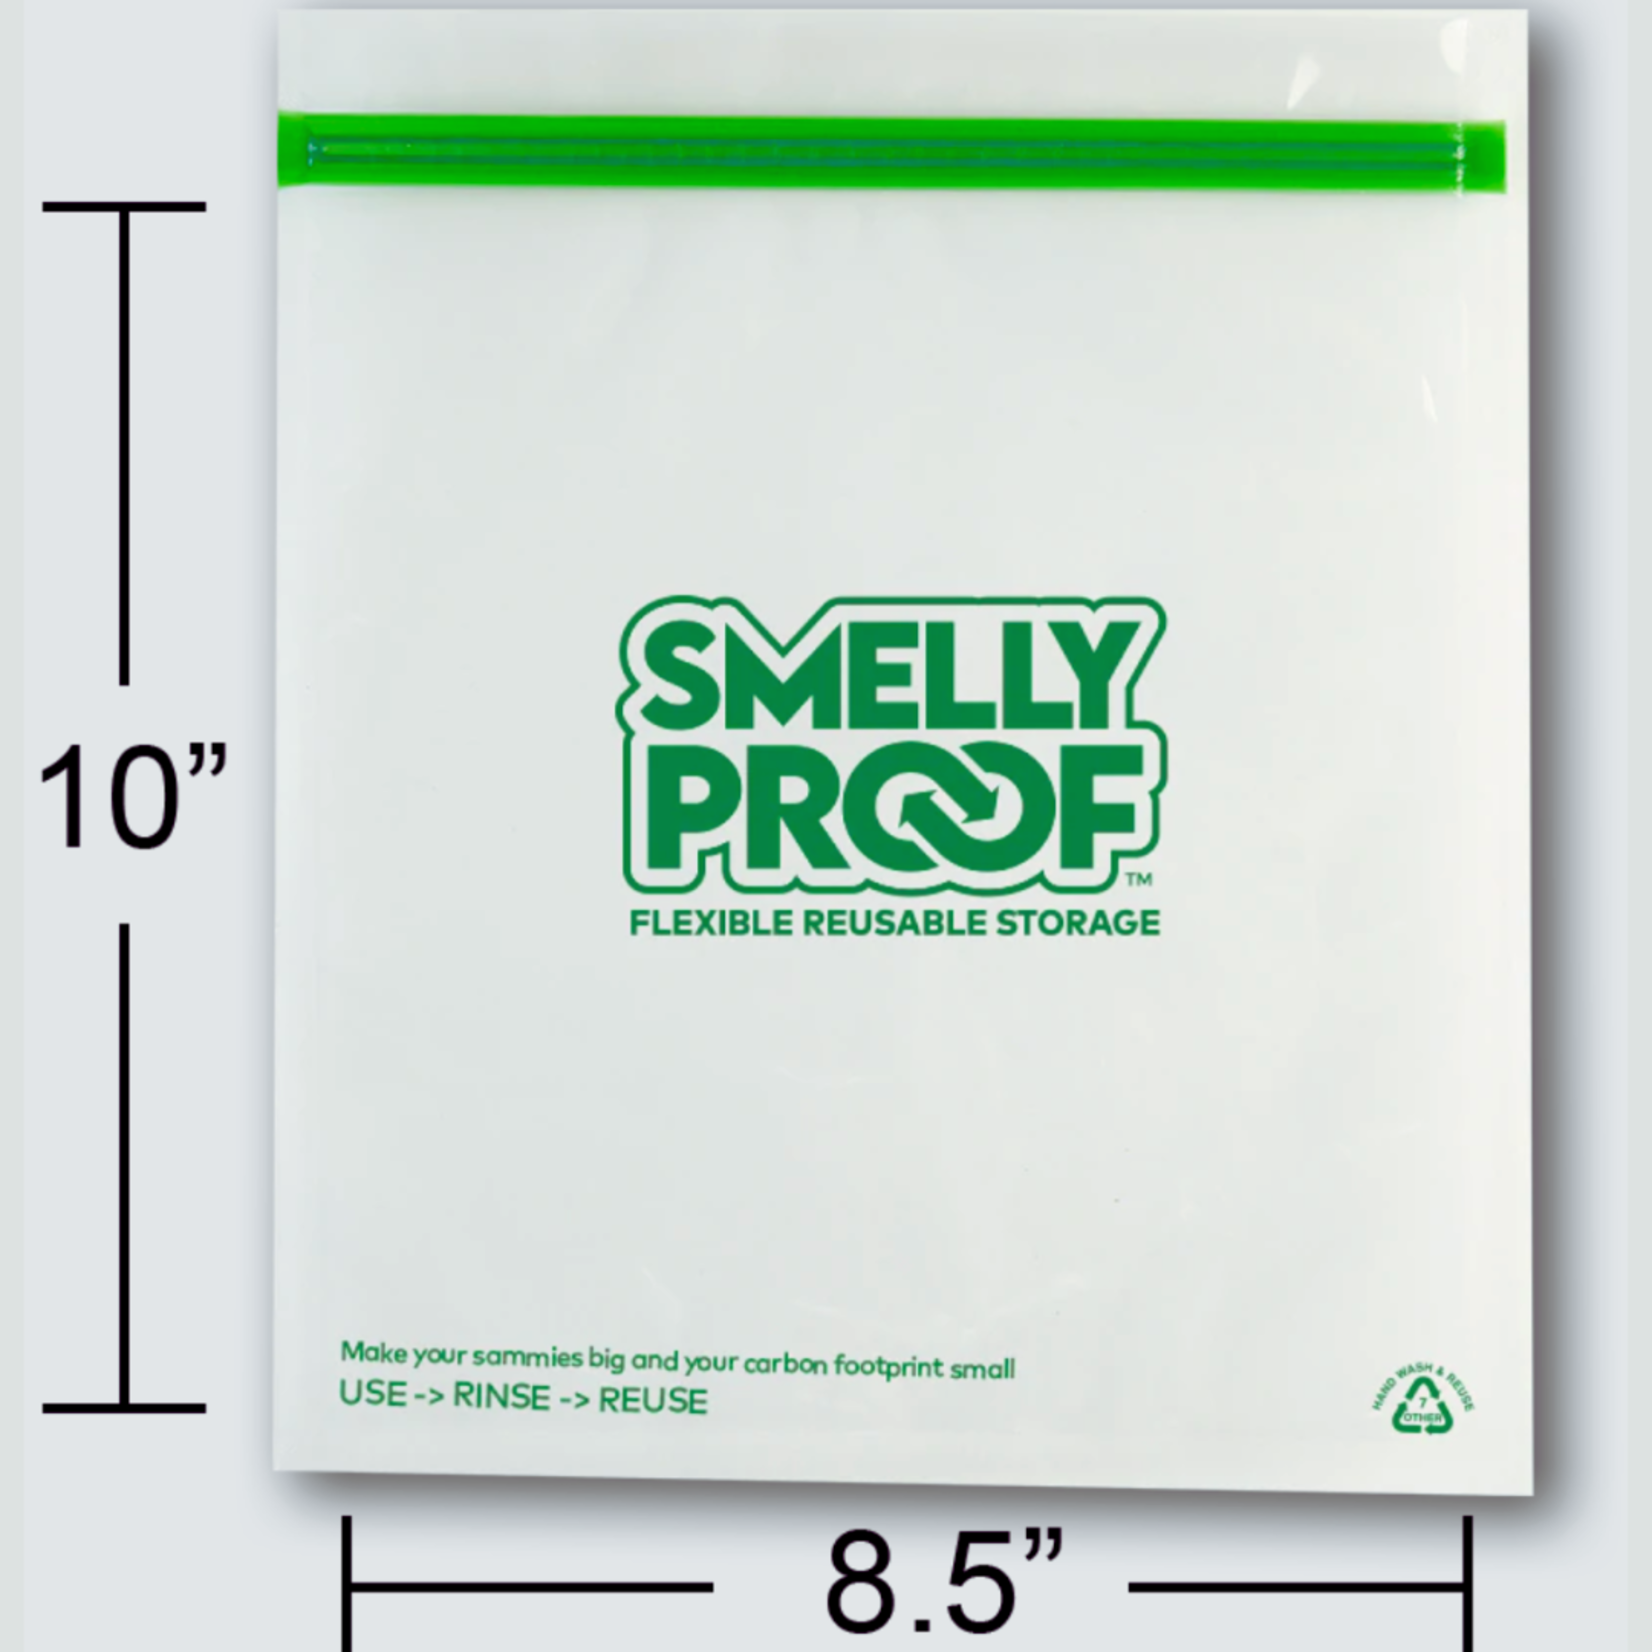 Smelly Proof Smelly Proof Bags